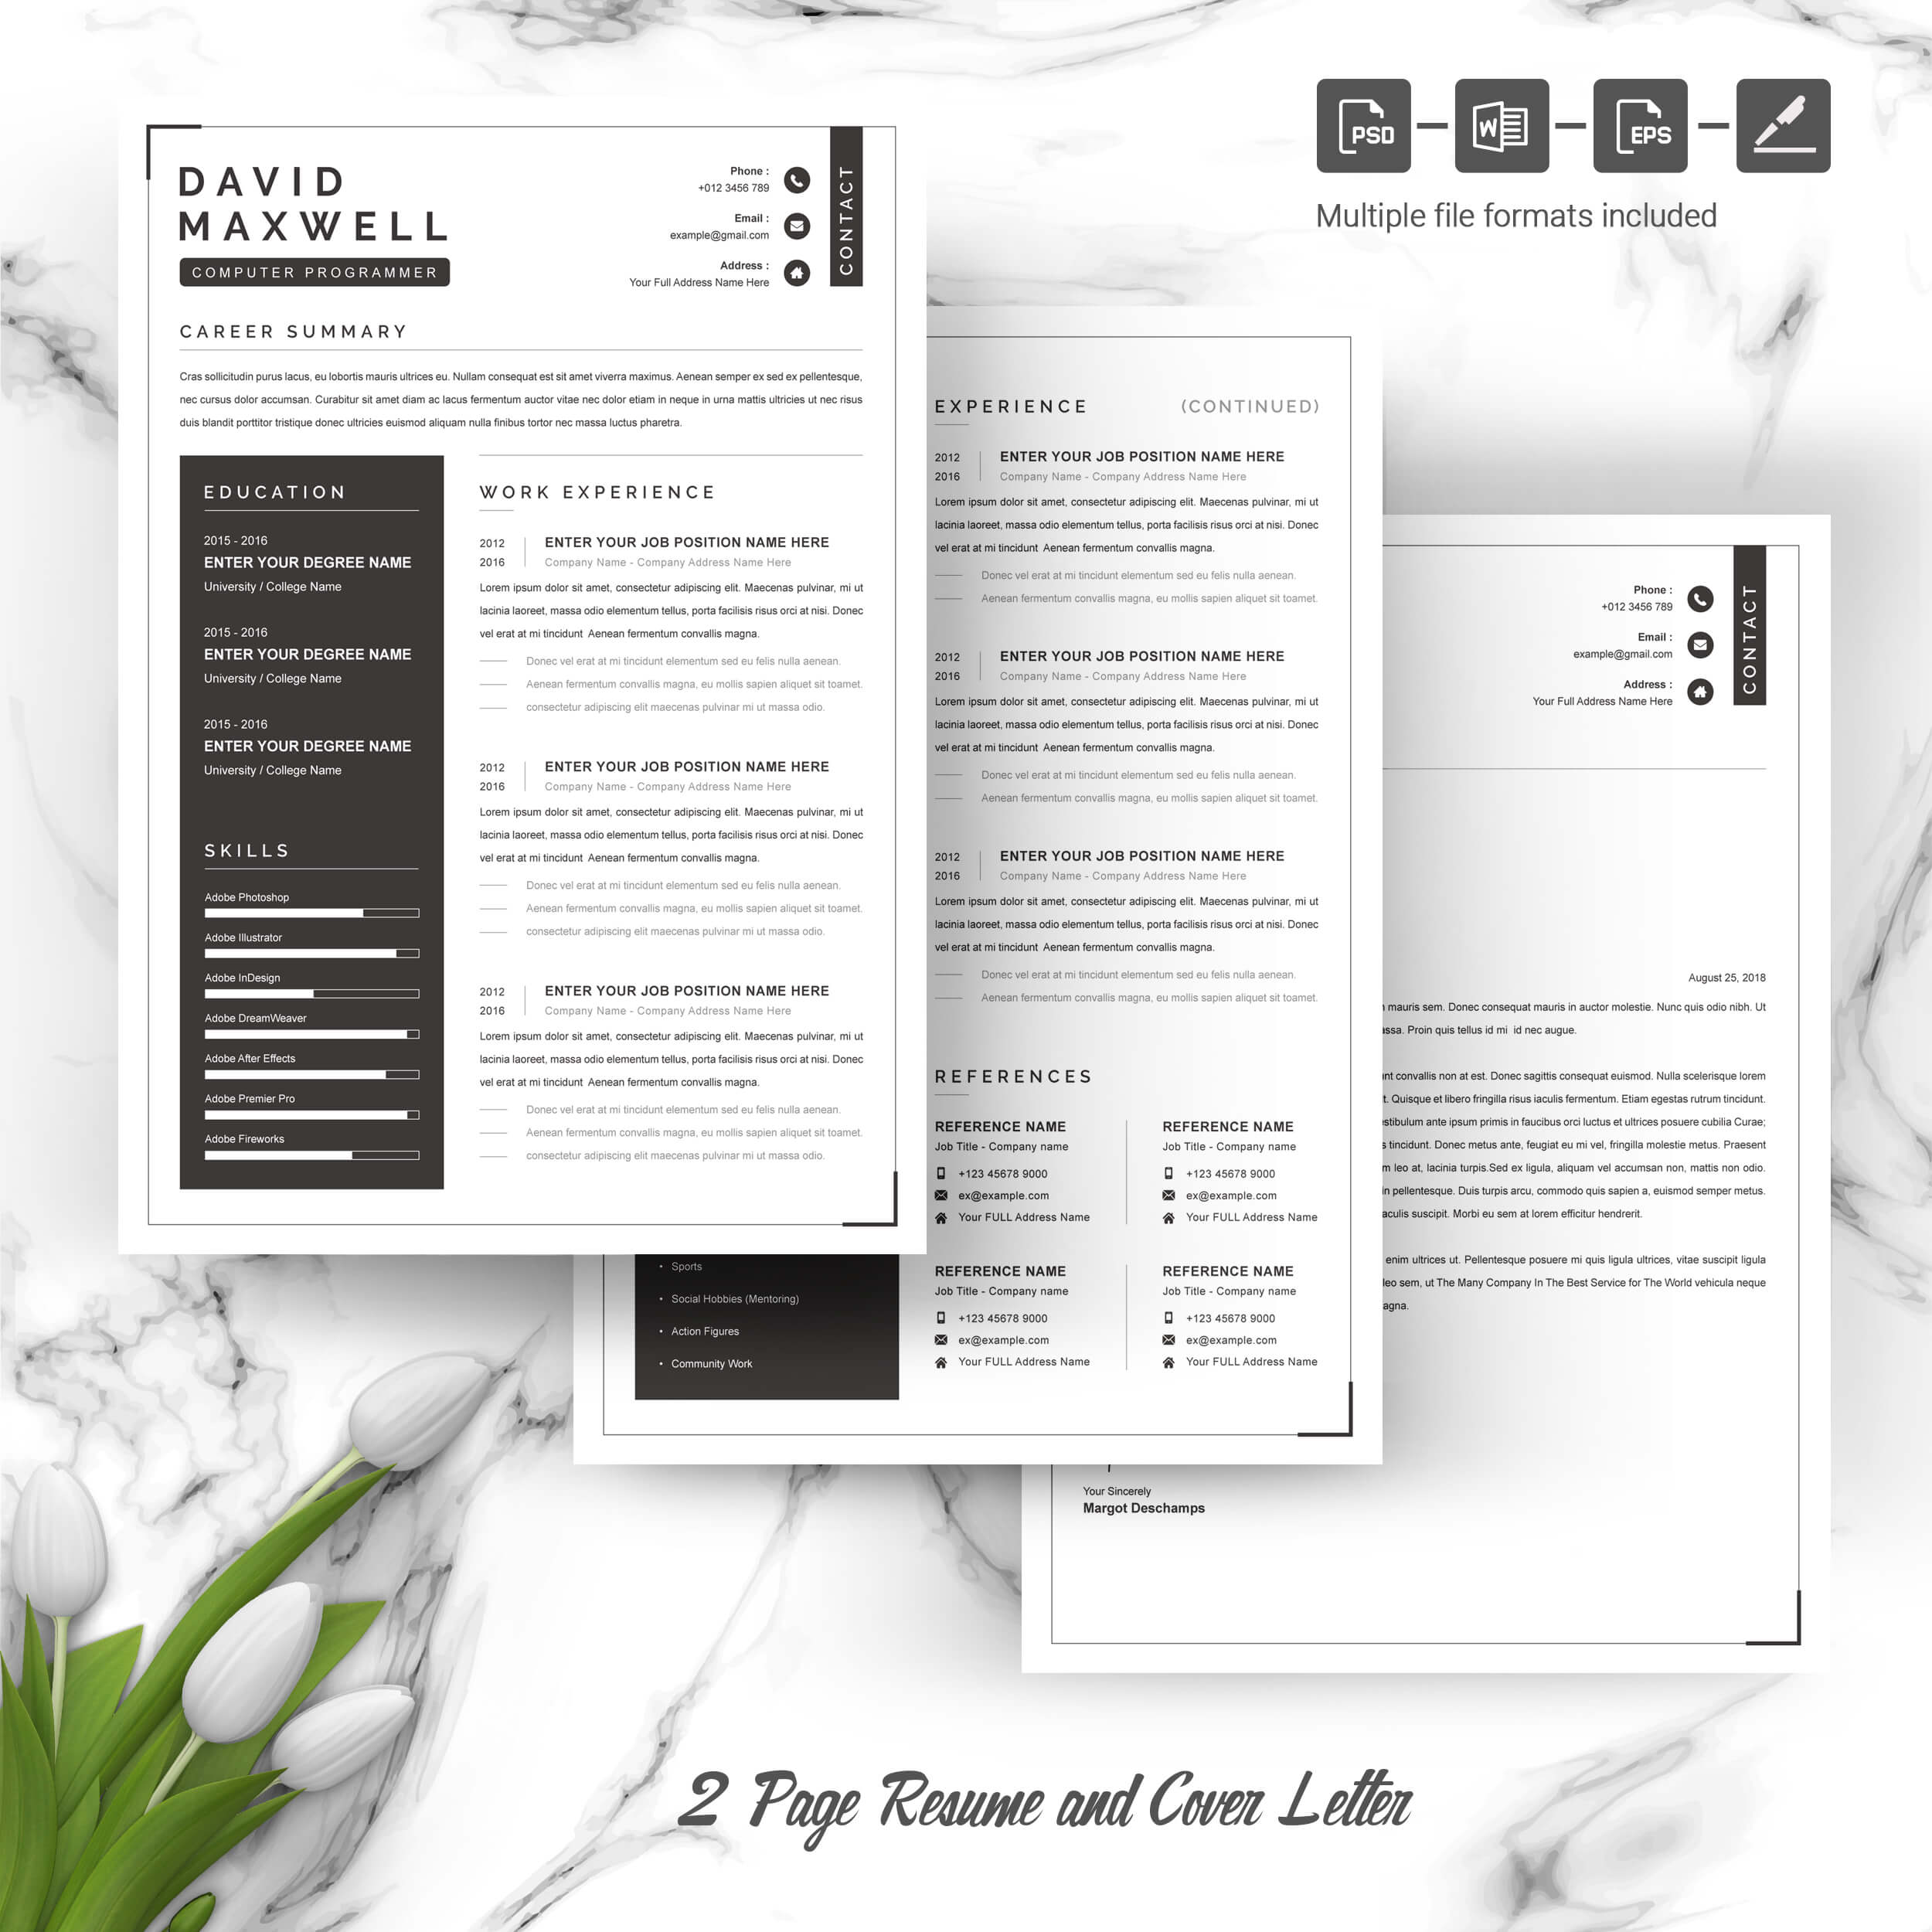 04 3 pages free resume design template 1 799